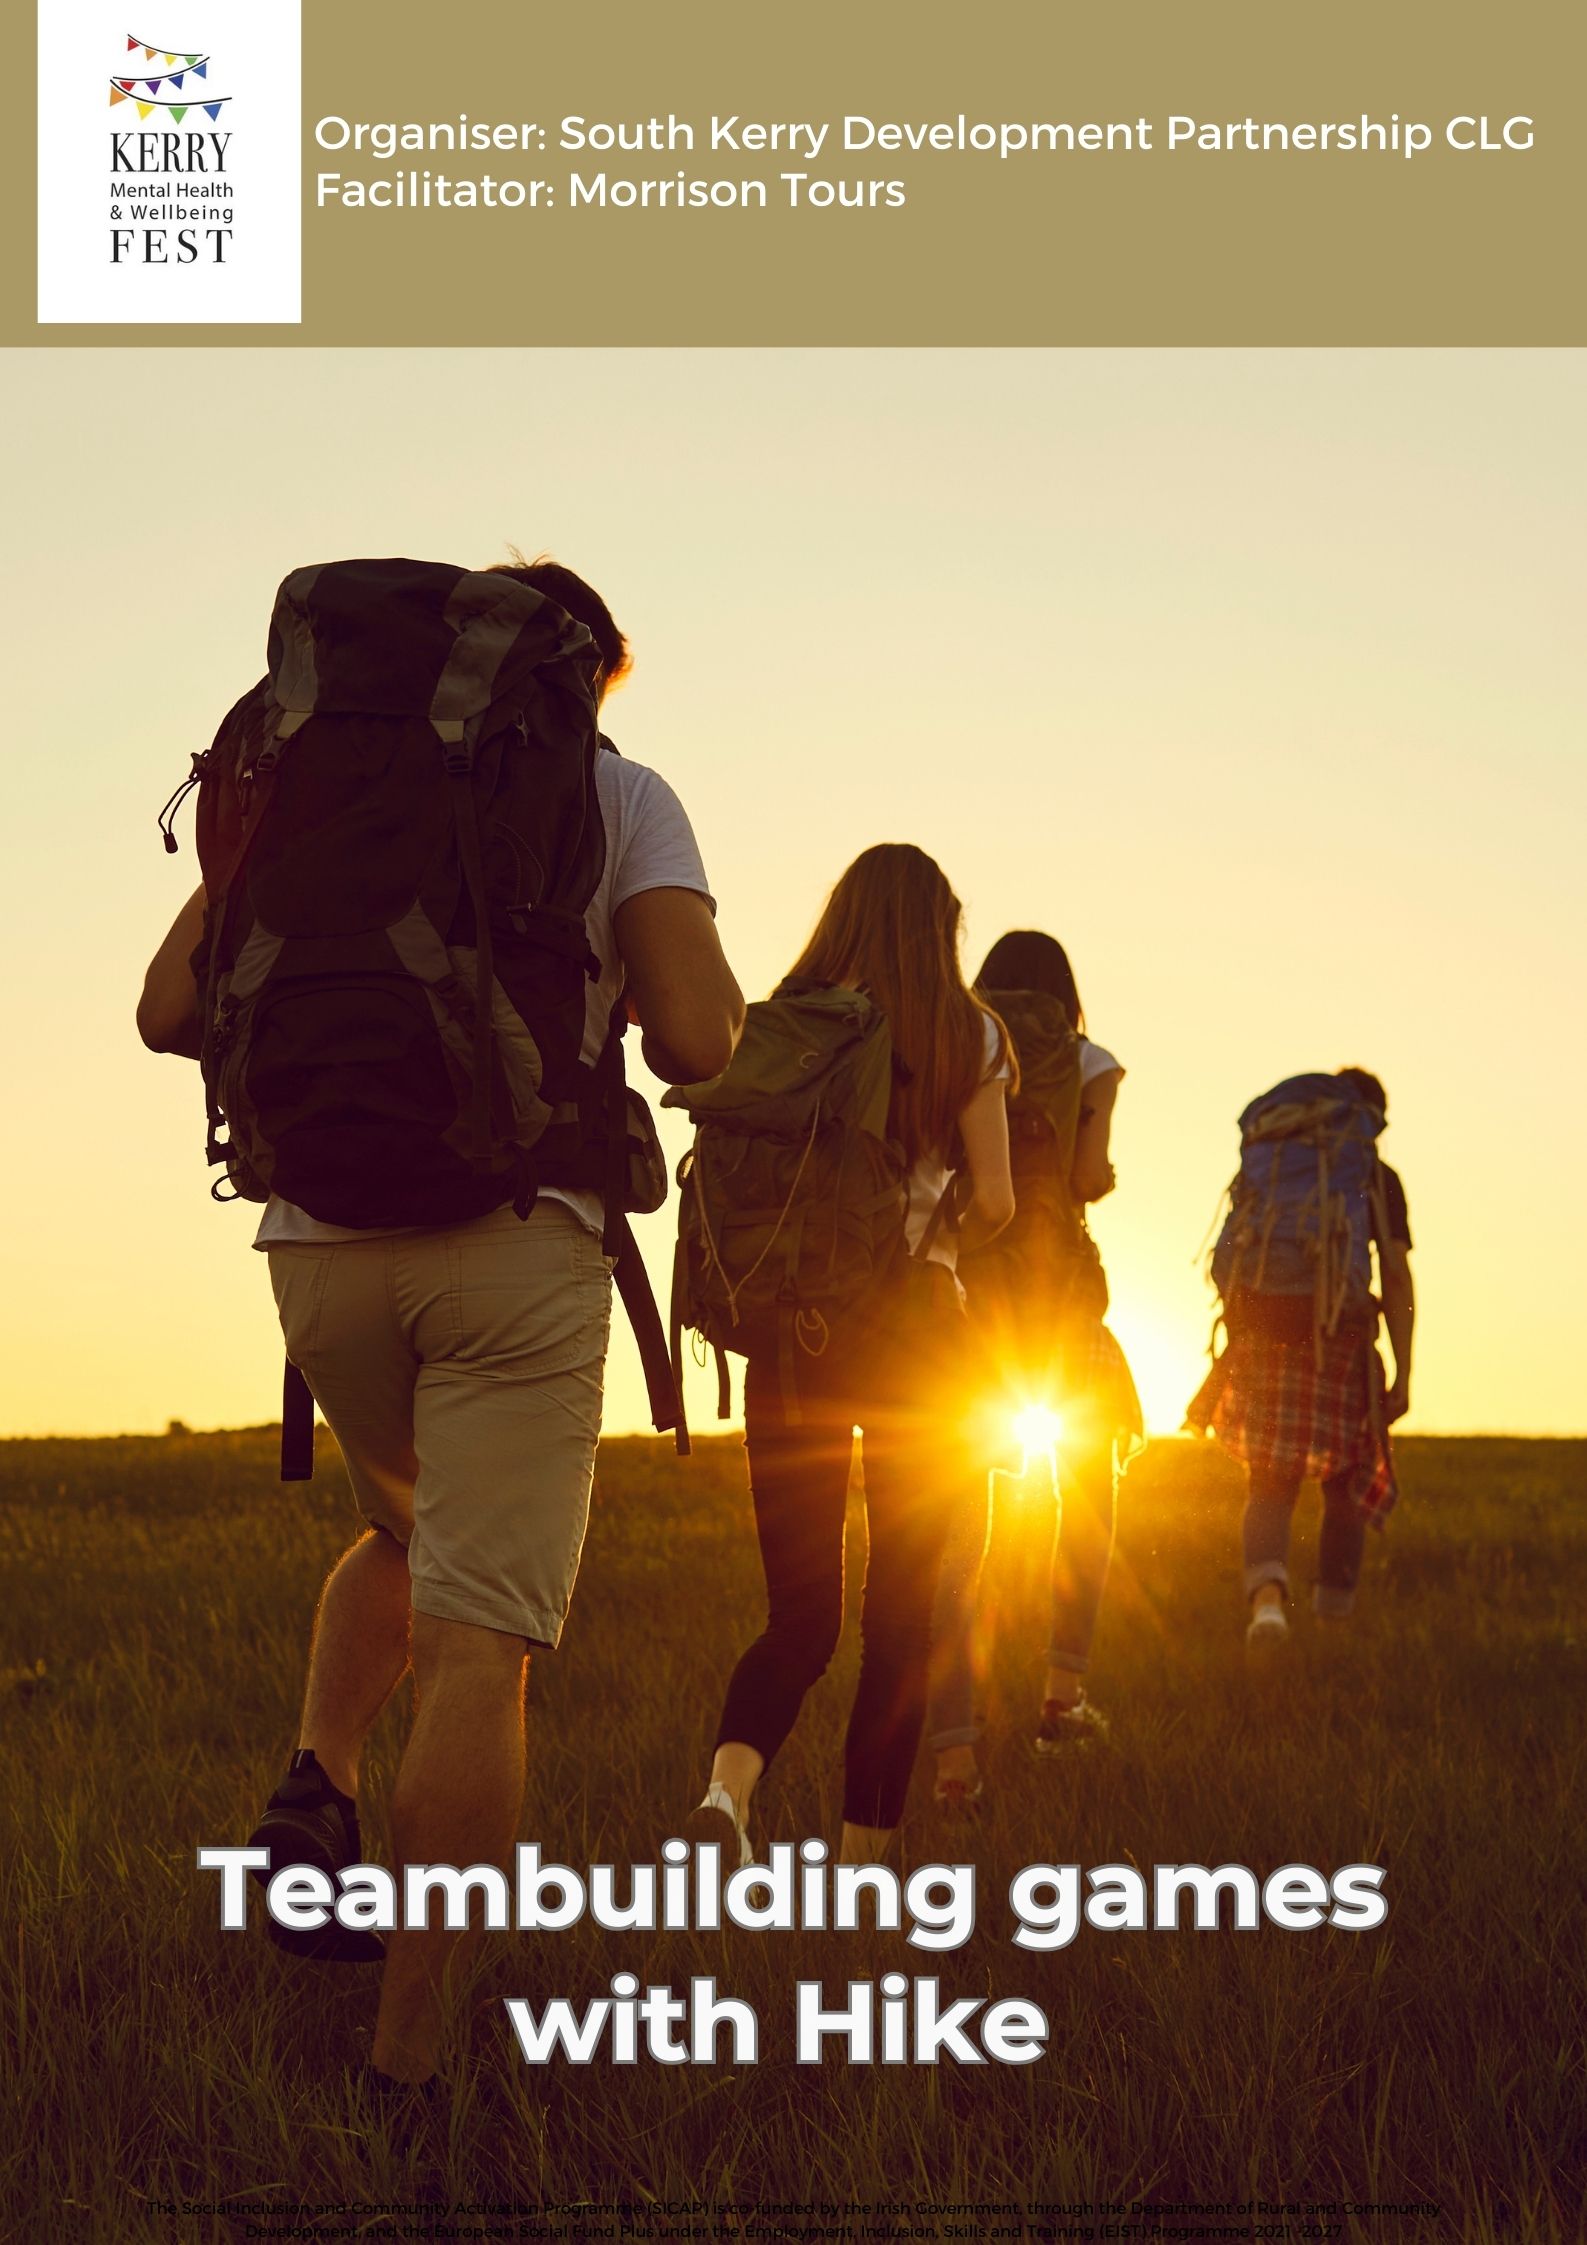 Team Building Games with Hike, Killarney event at Kerry Mental Health & Wellbeing Fest 2022